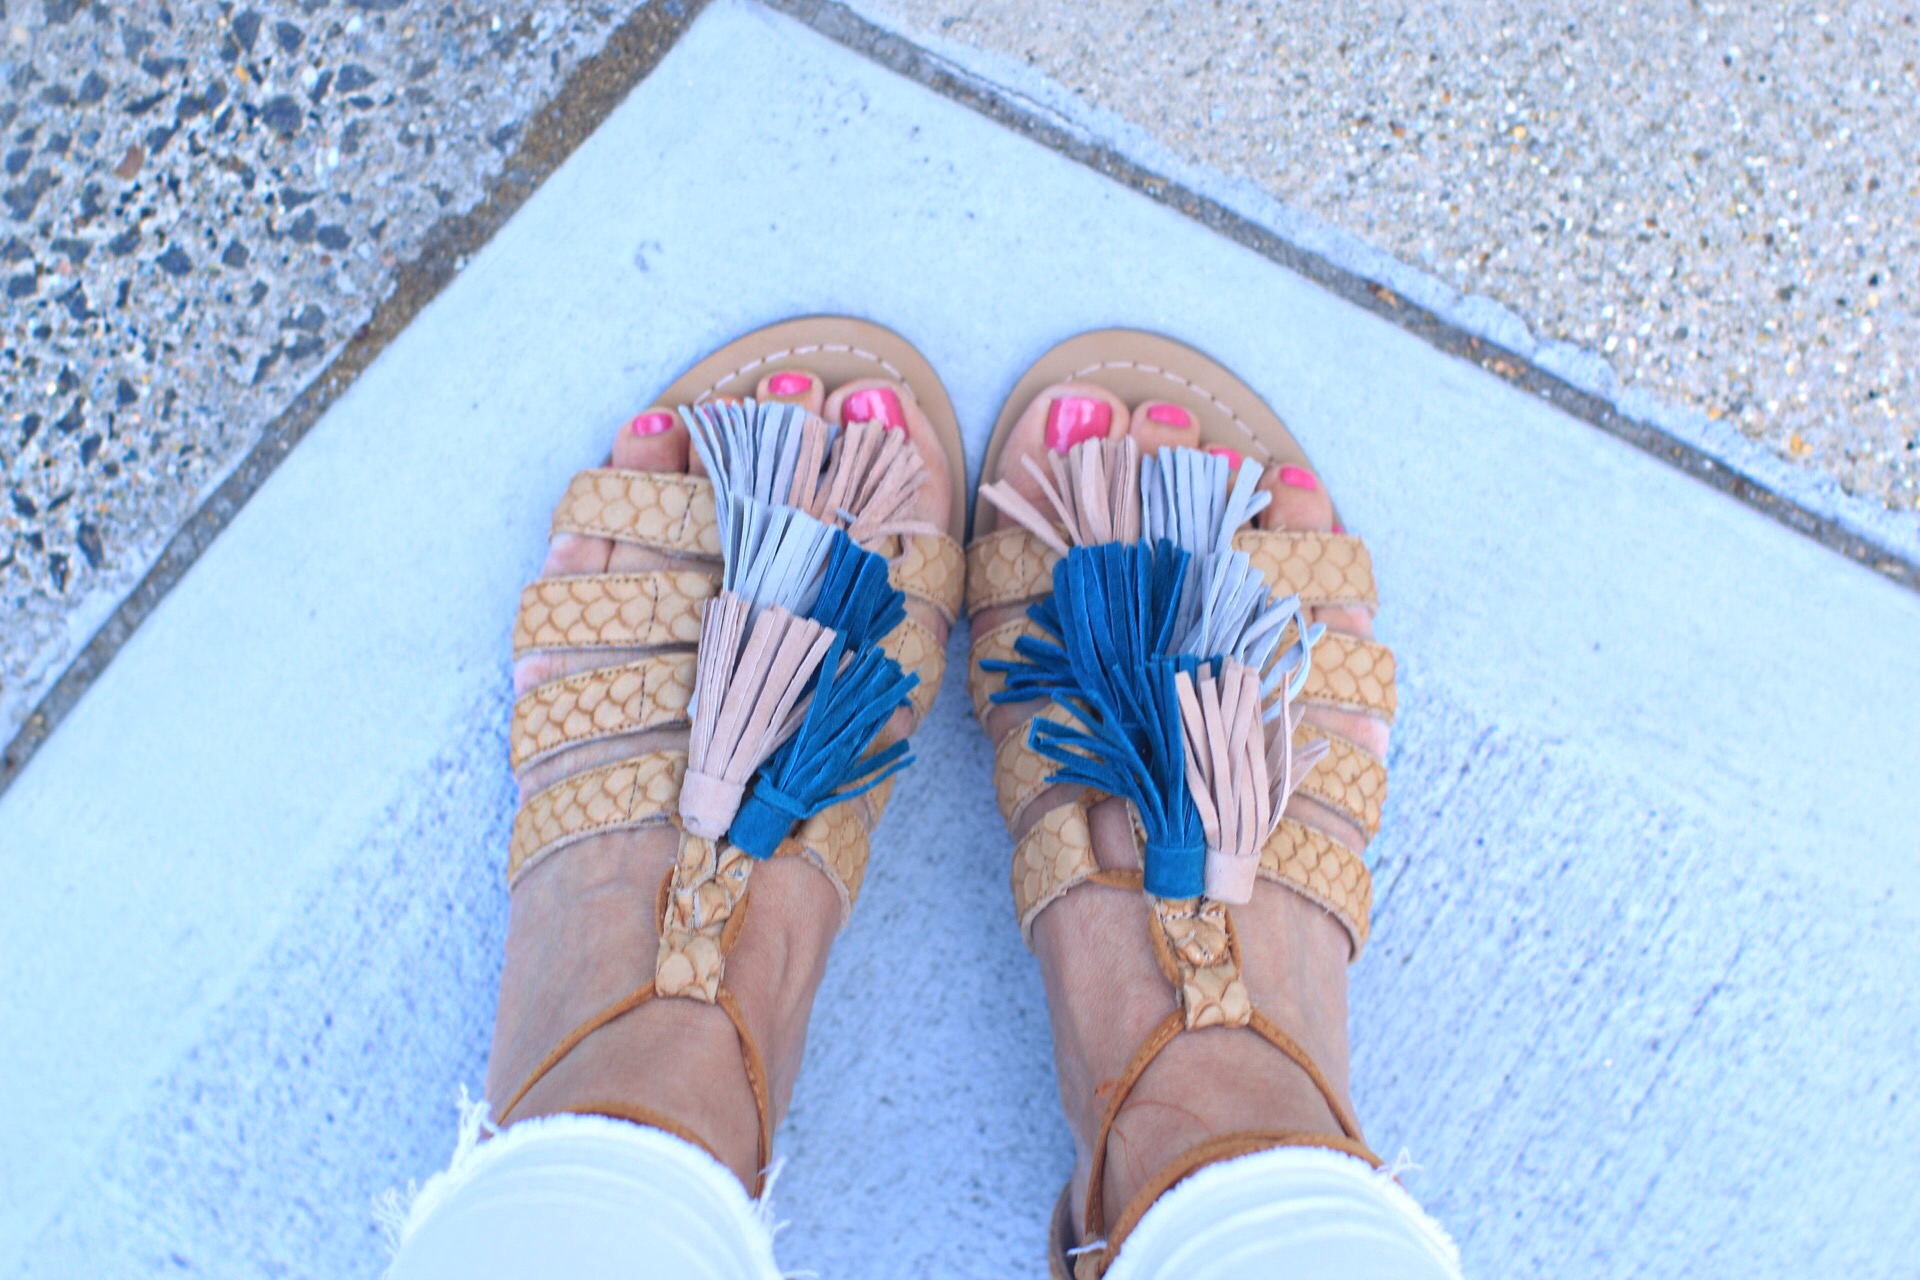 Jenna Crandall from Lunchpails and Lipstick in Sam Edelman fringe sandals